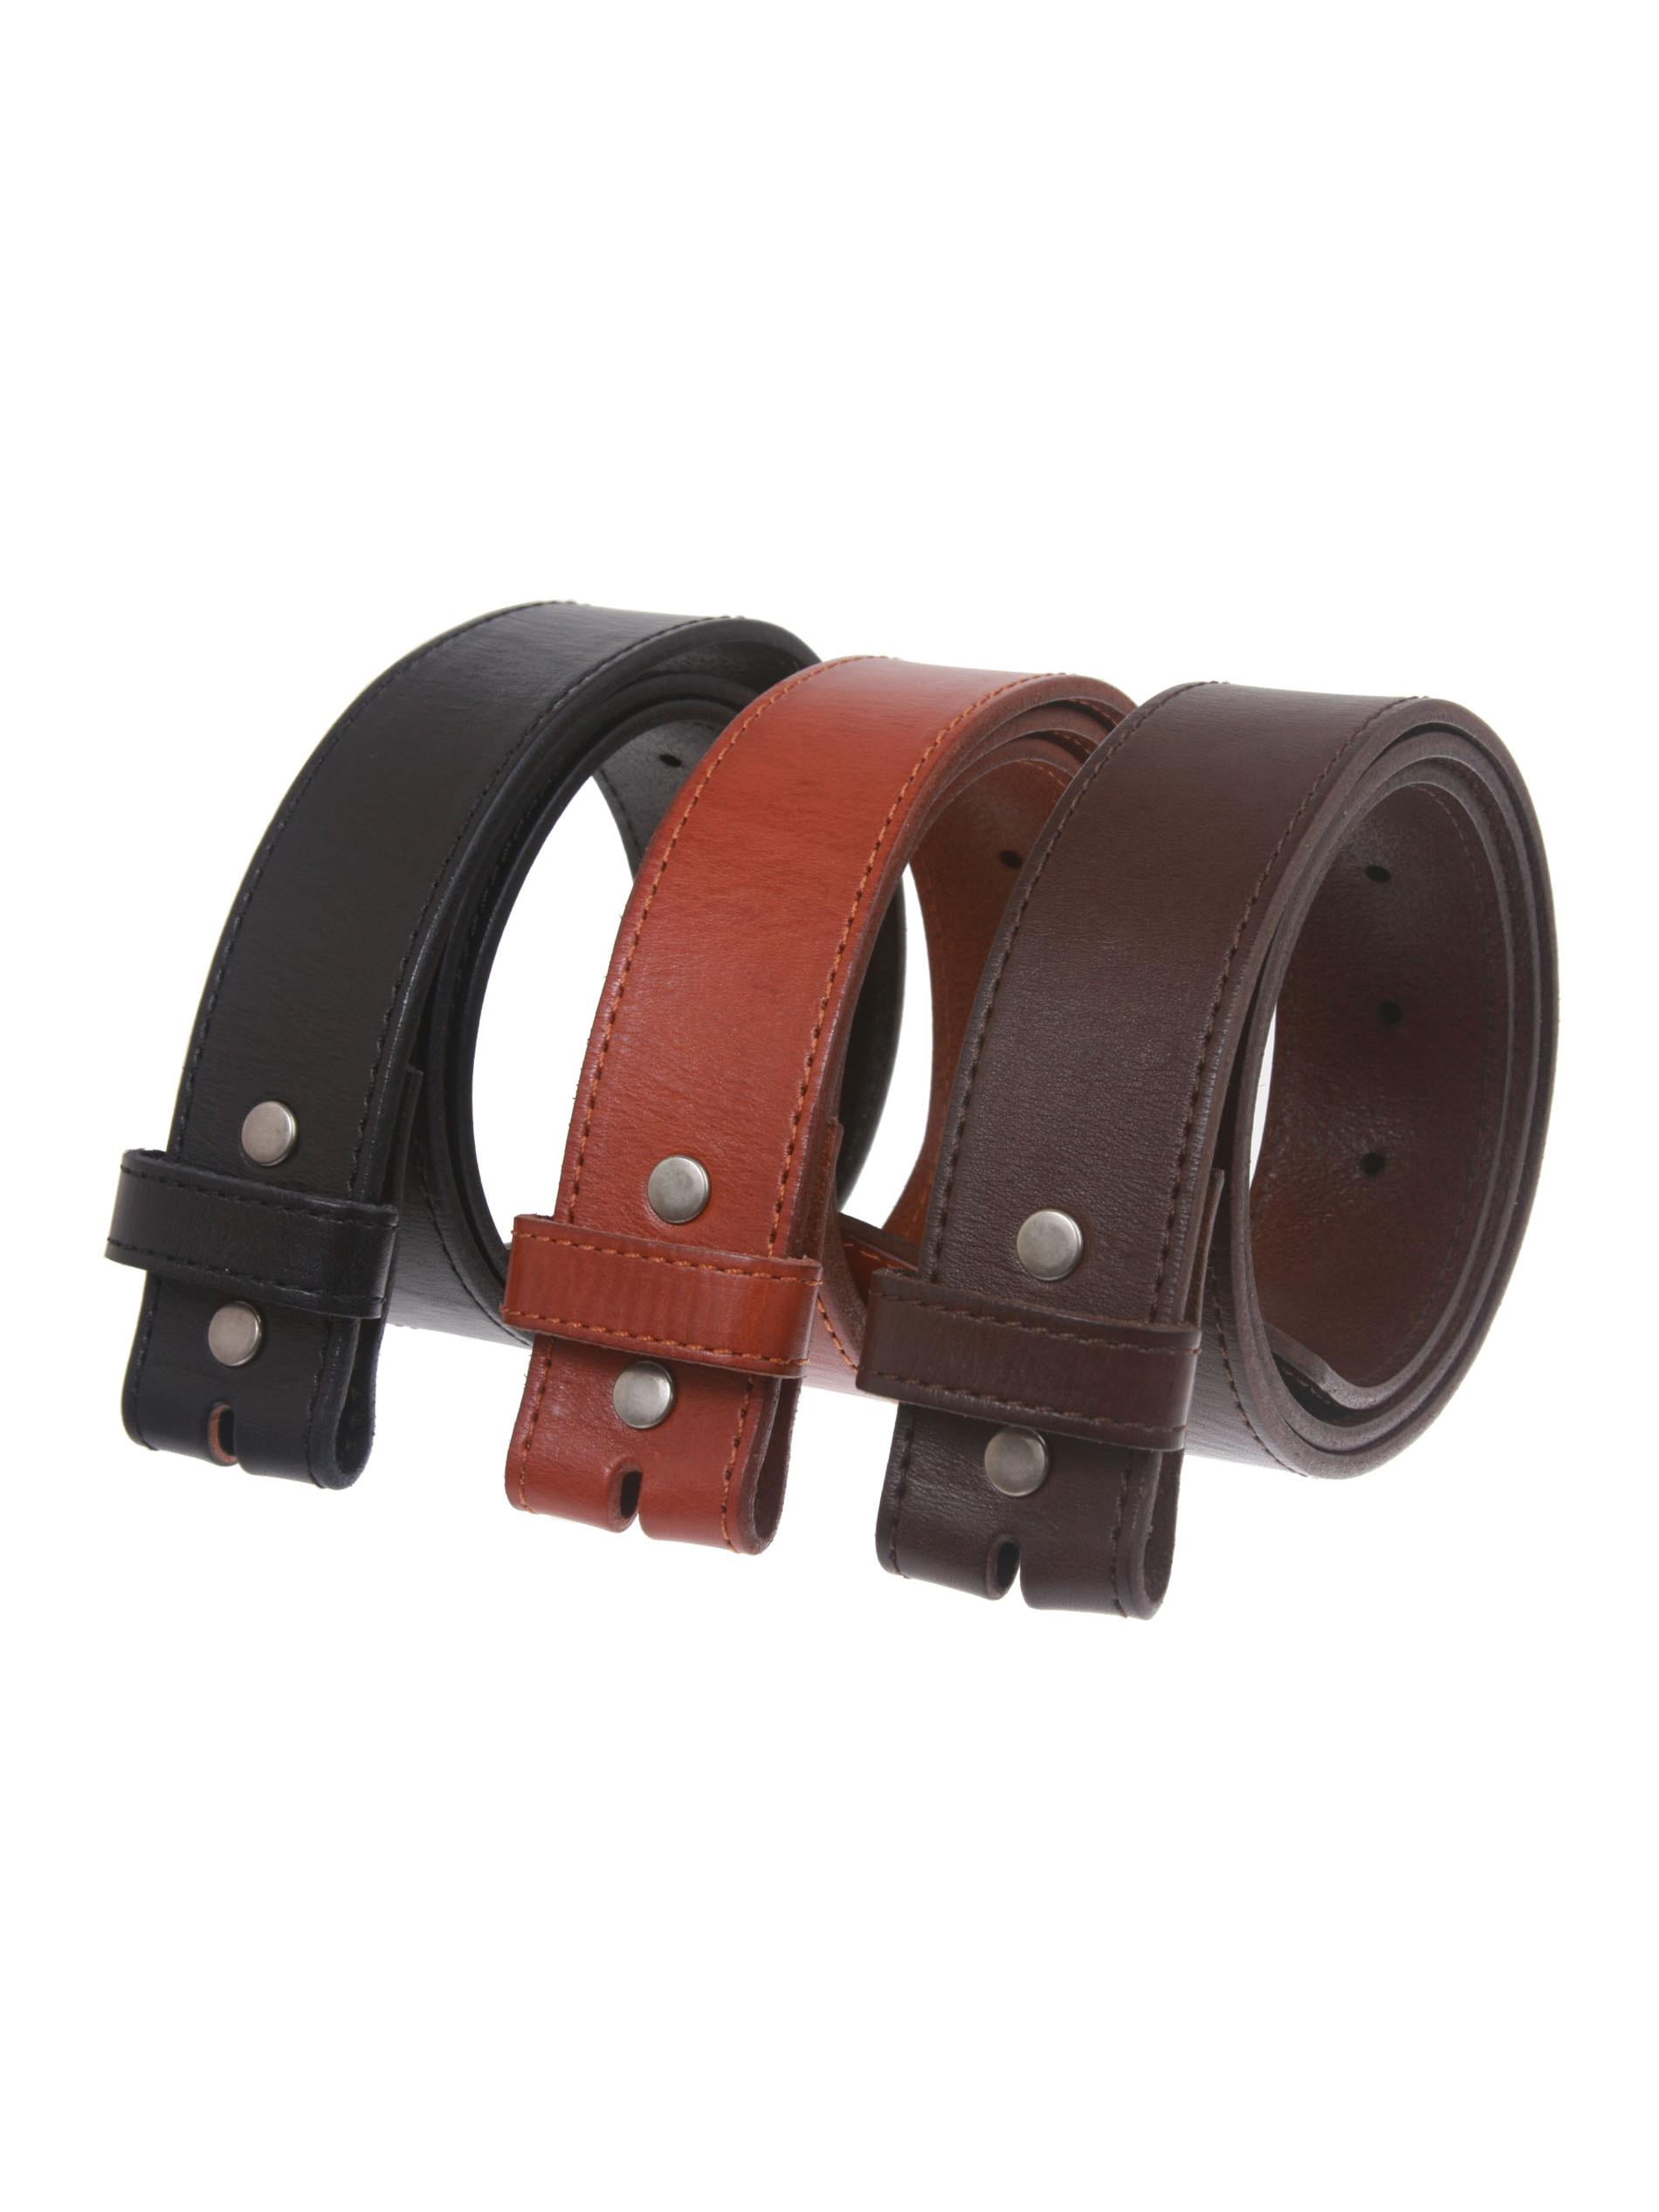 Genuine Leather Belt Strap Without Buckle Full Grain Cowhide Real Leather Belt For Jeans and Casual Pants Accessories Belts & Braces Belts 